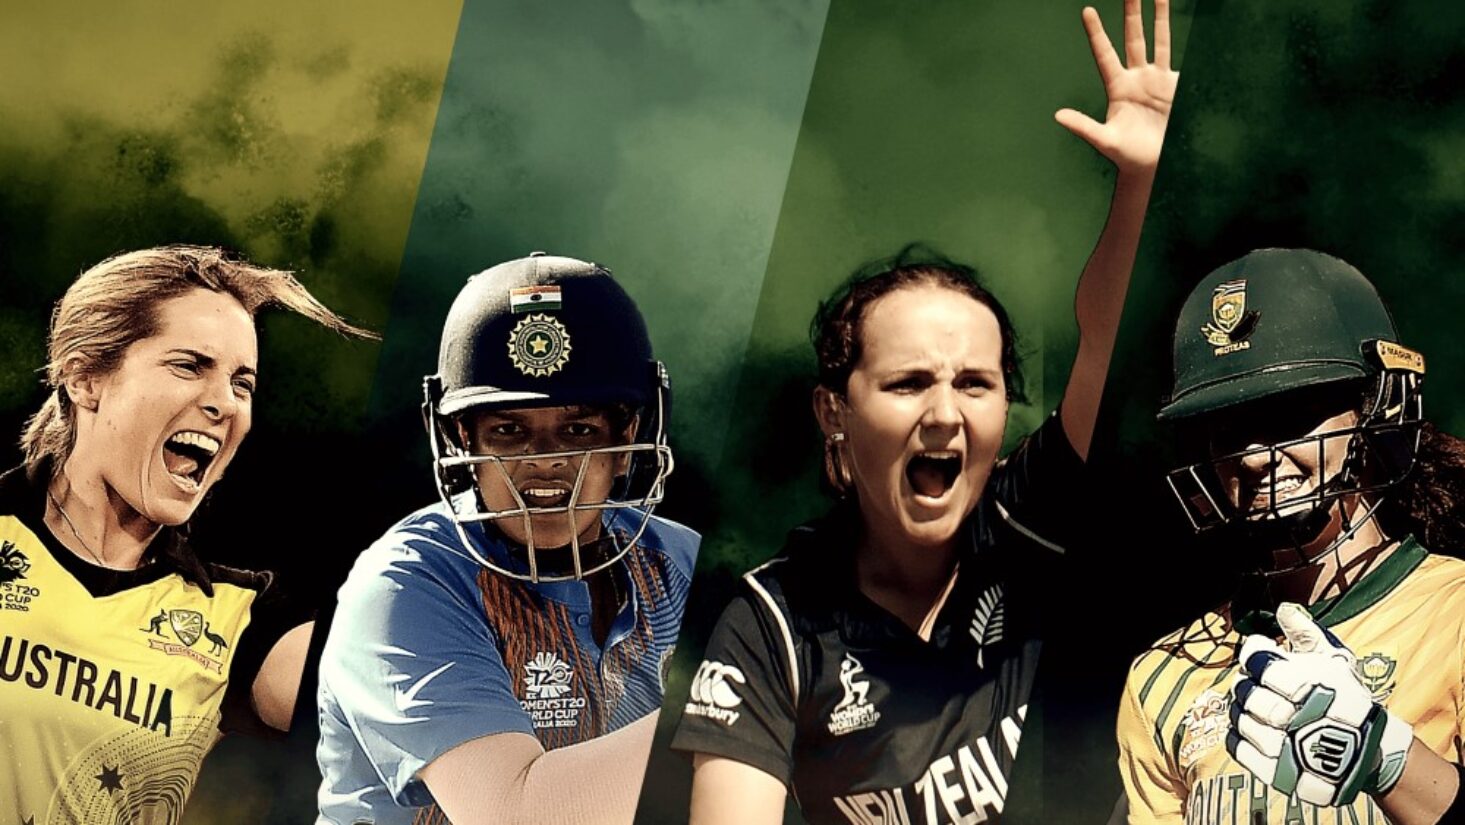 Profiles of Prominent Women Cricketers